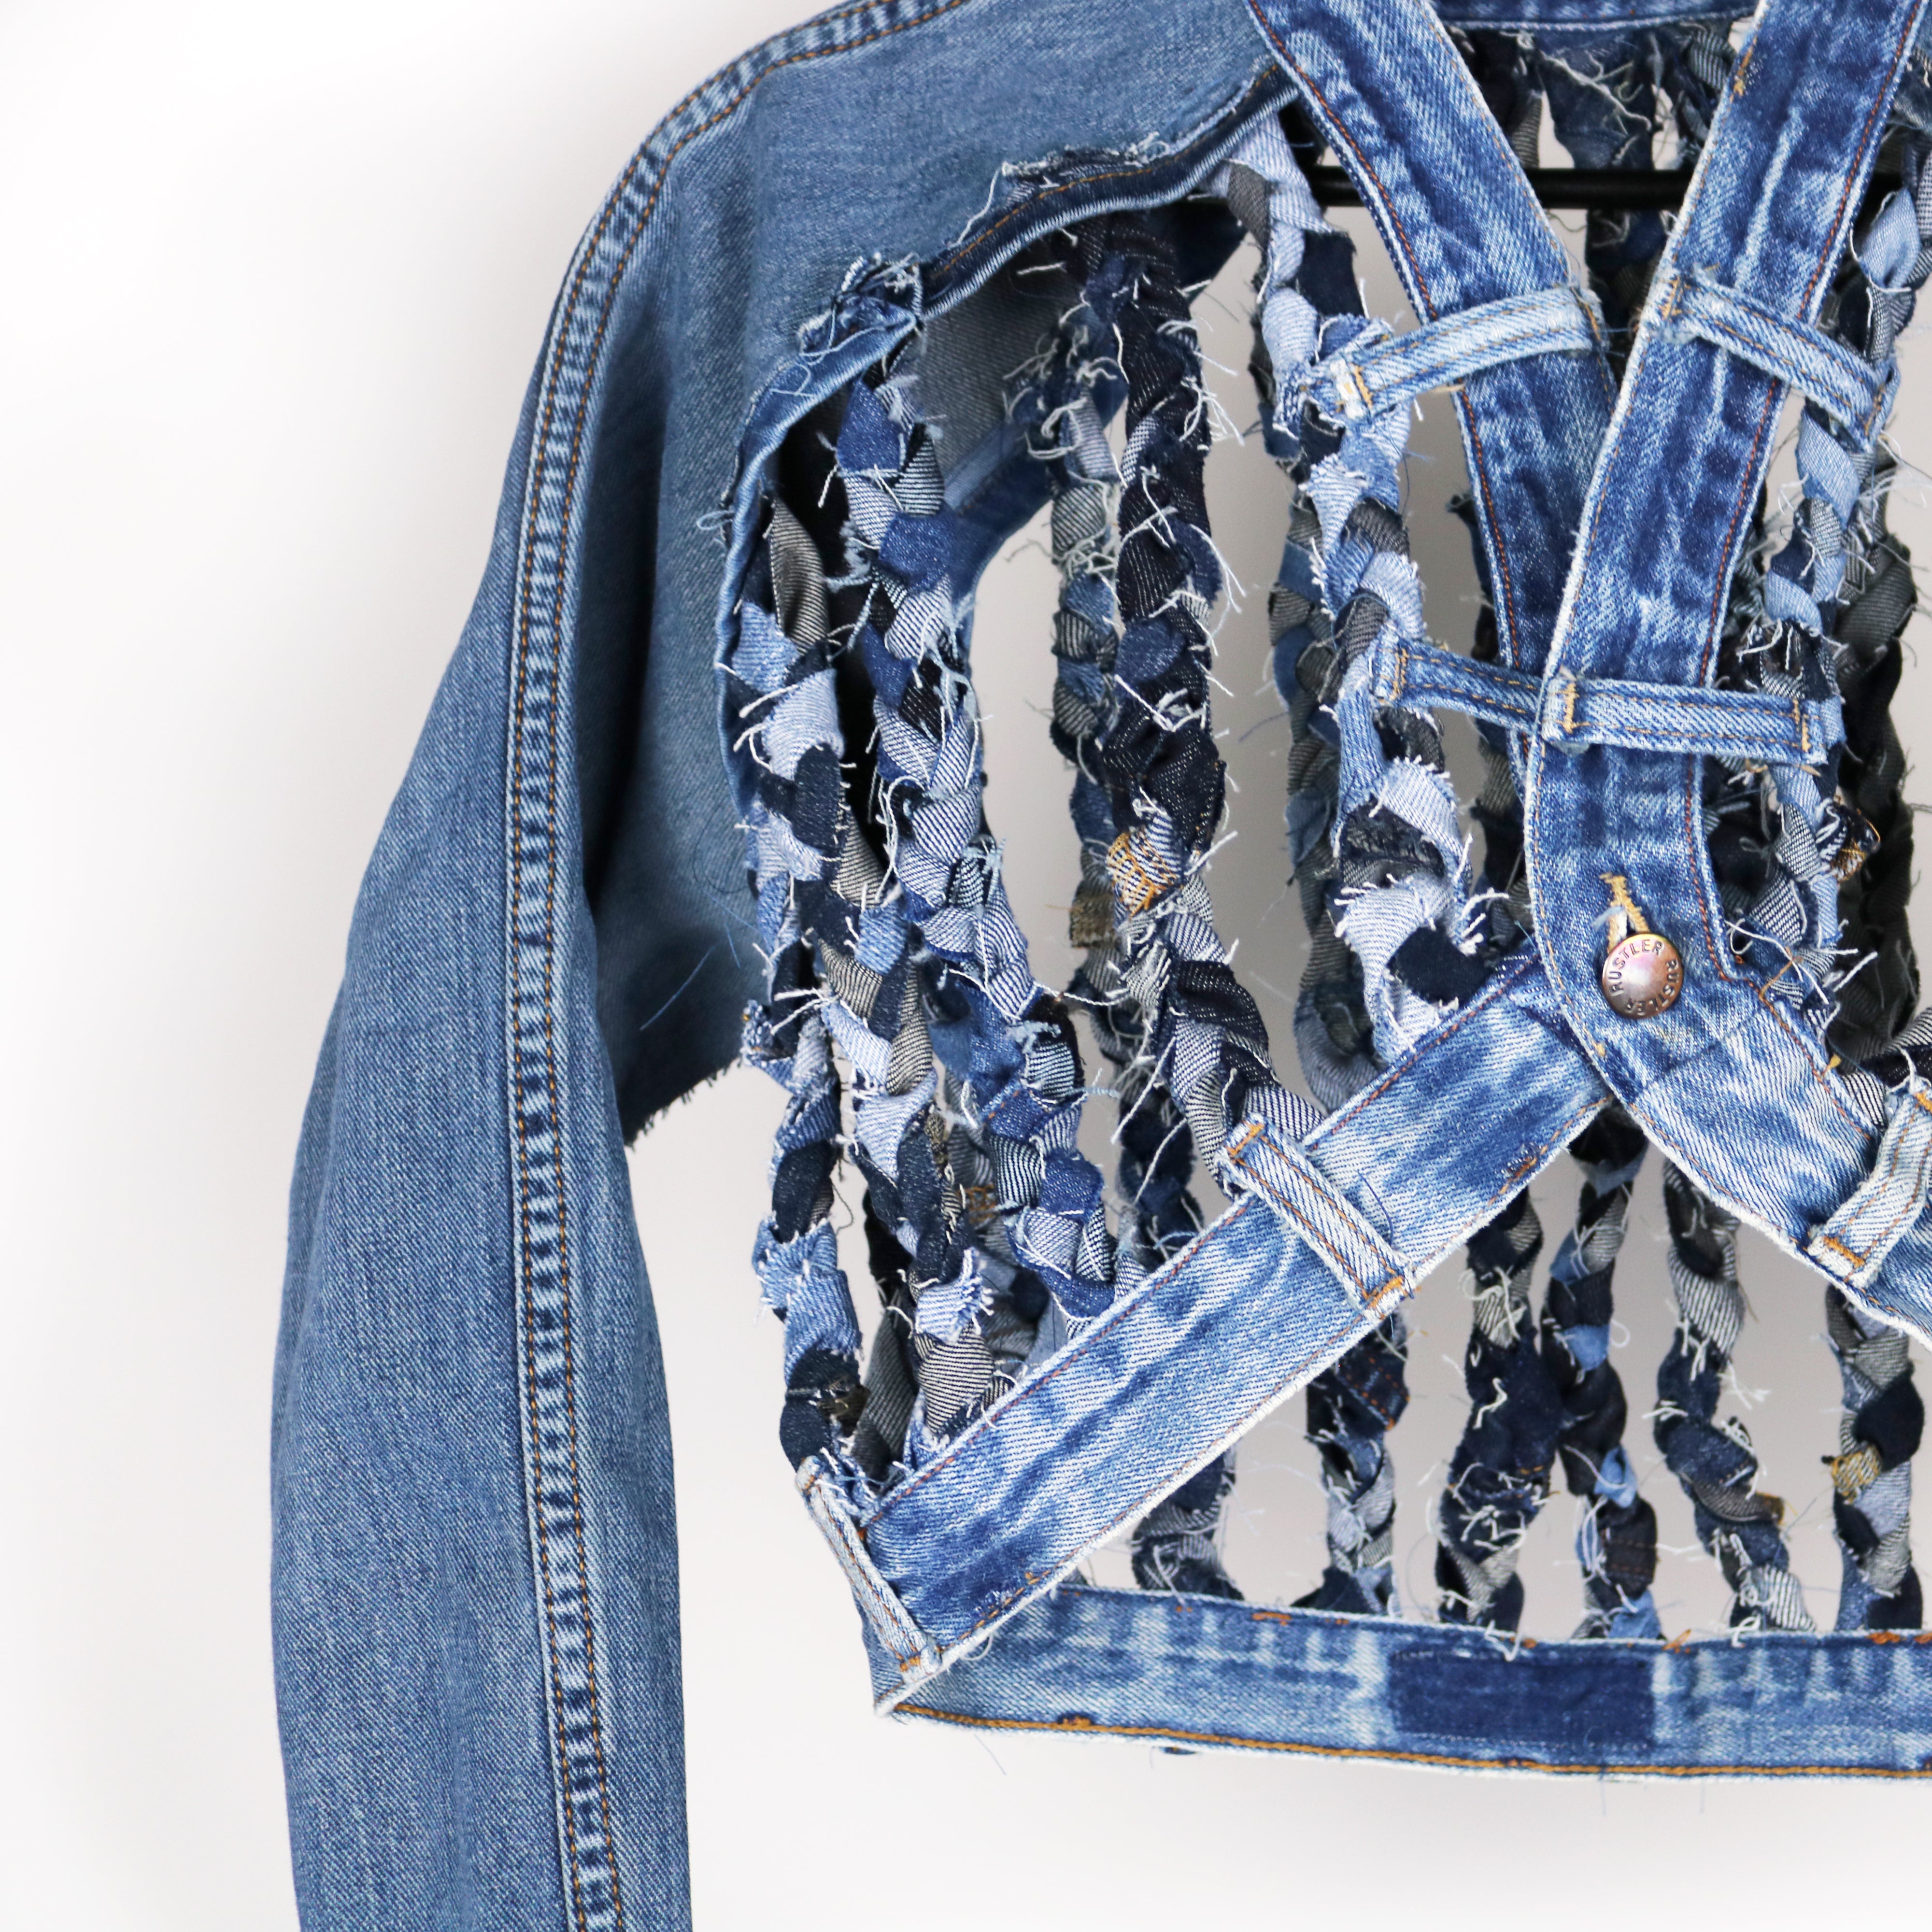 lemondedaddy Recycled Denim Jacket with Tulle Love in Cage